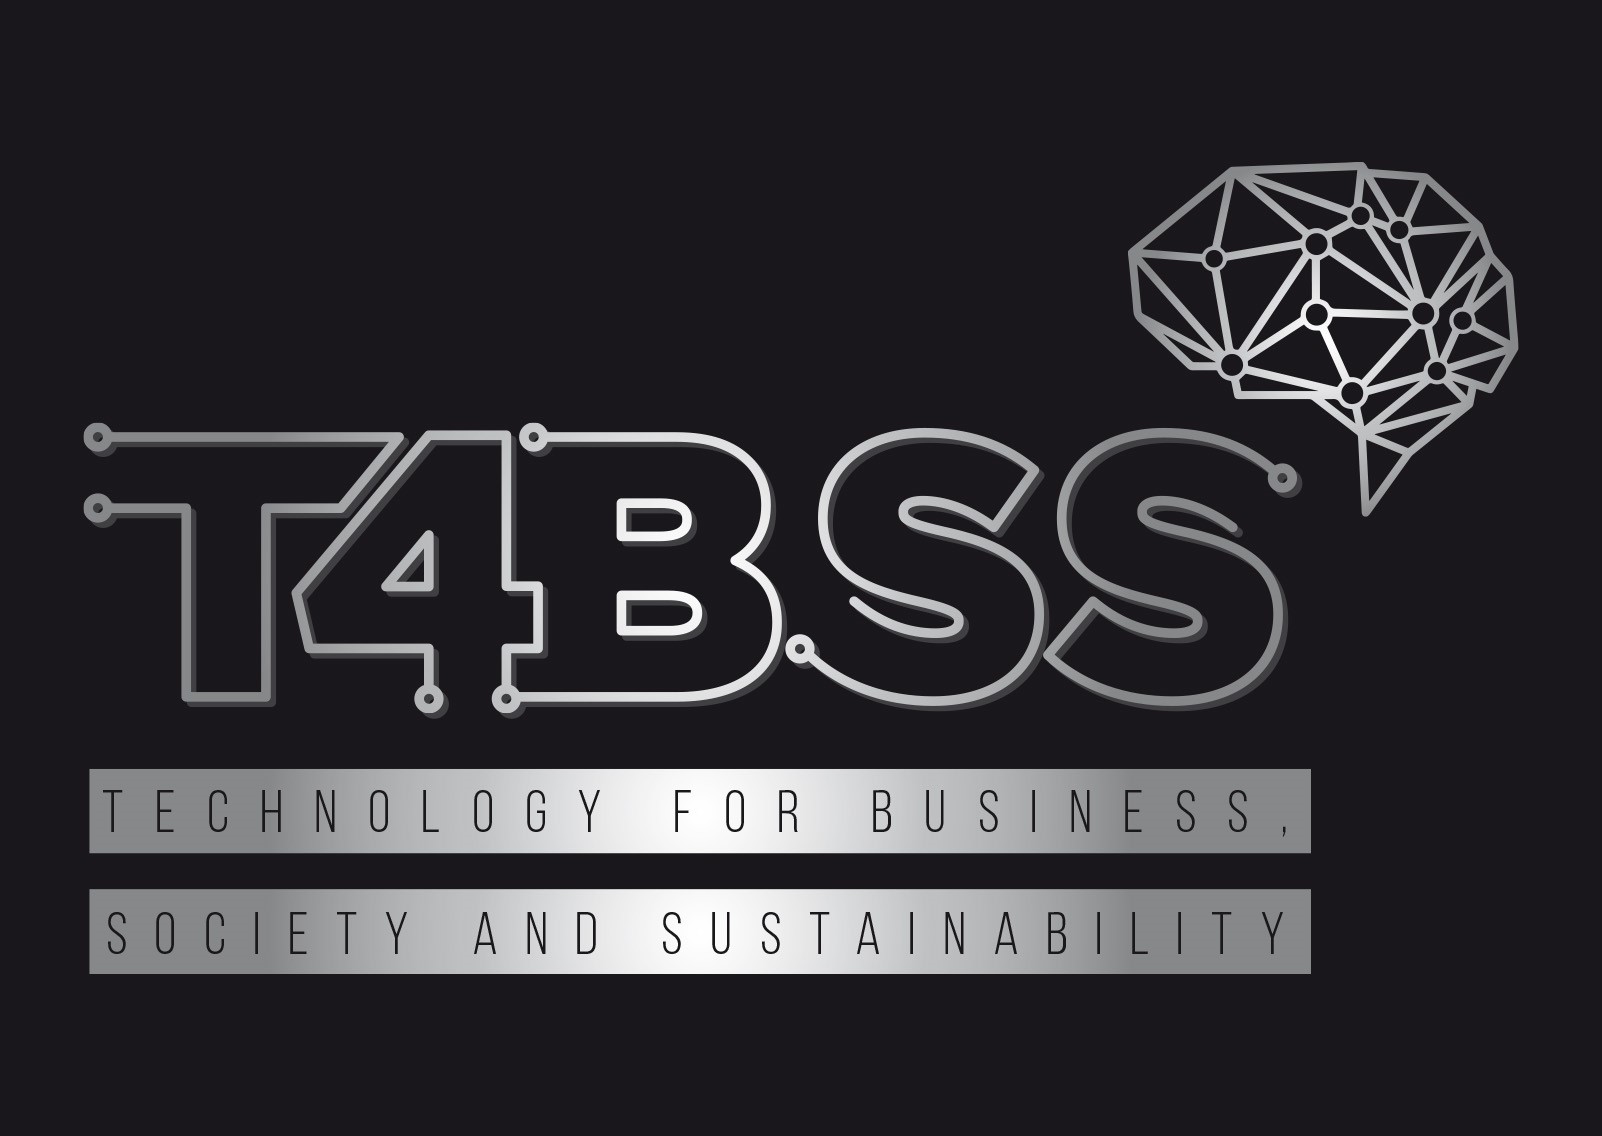 Logo T4BSS (Technology for business, society and sustainability)